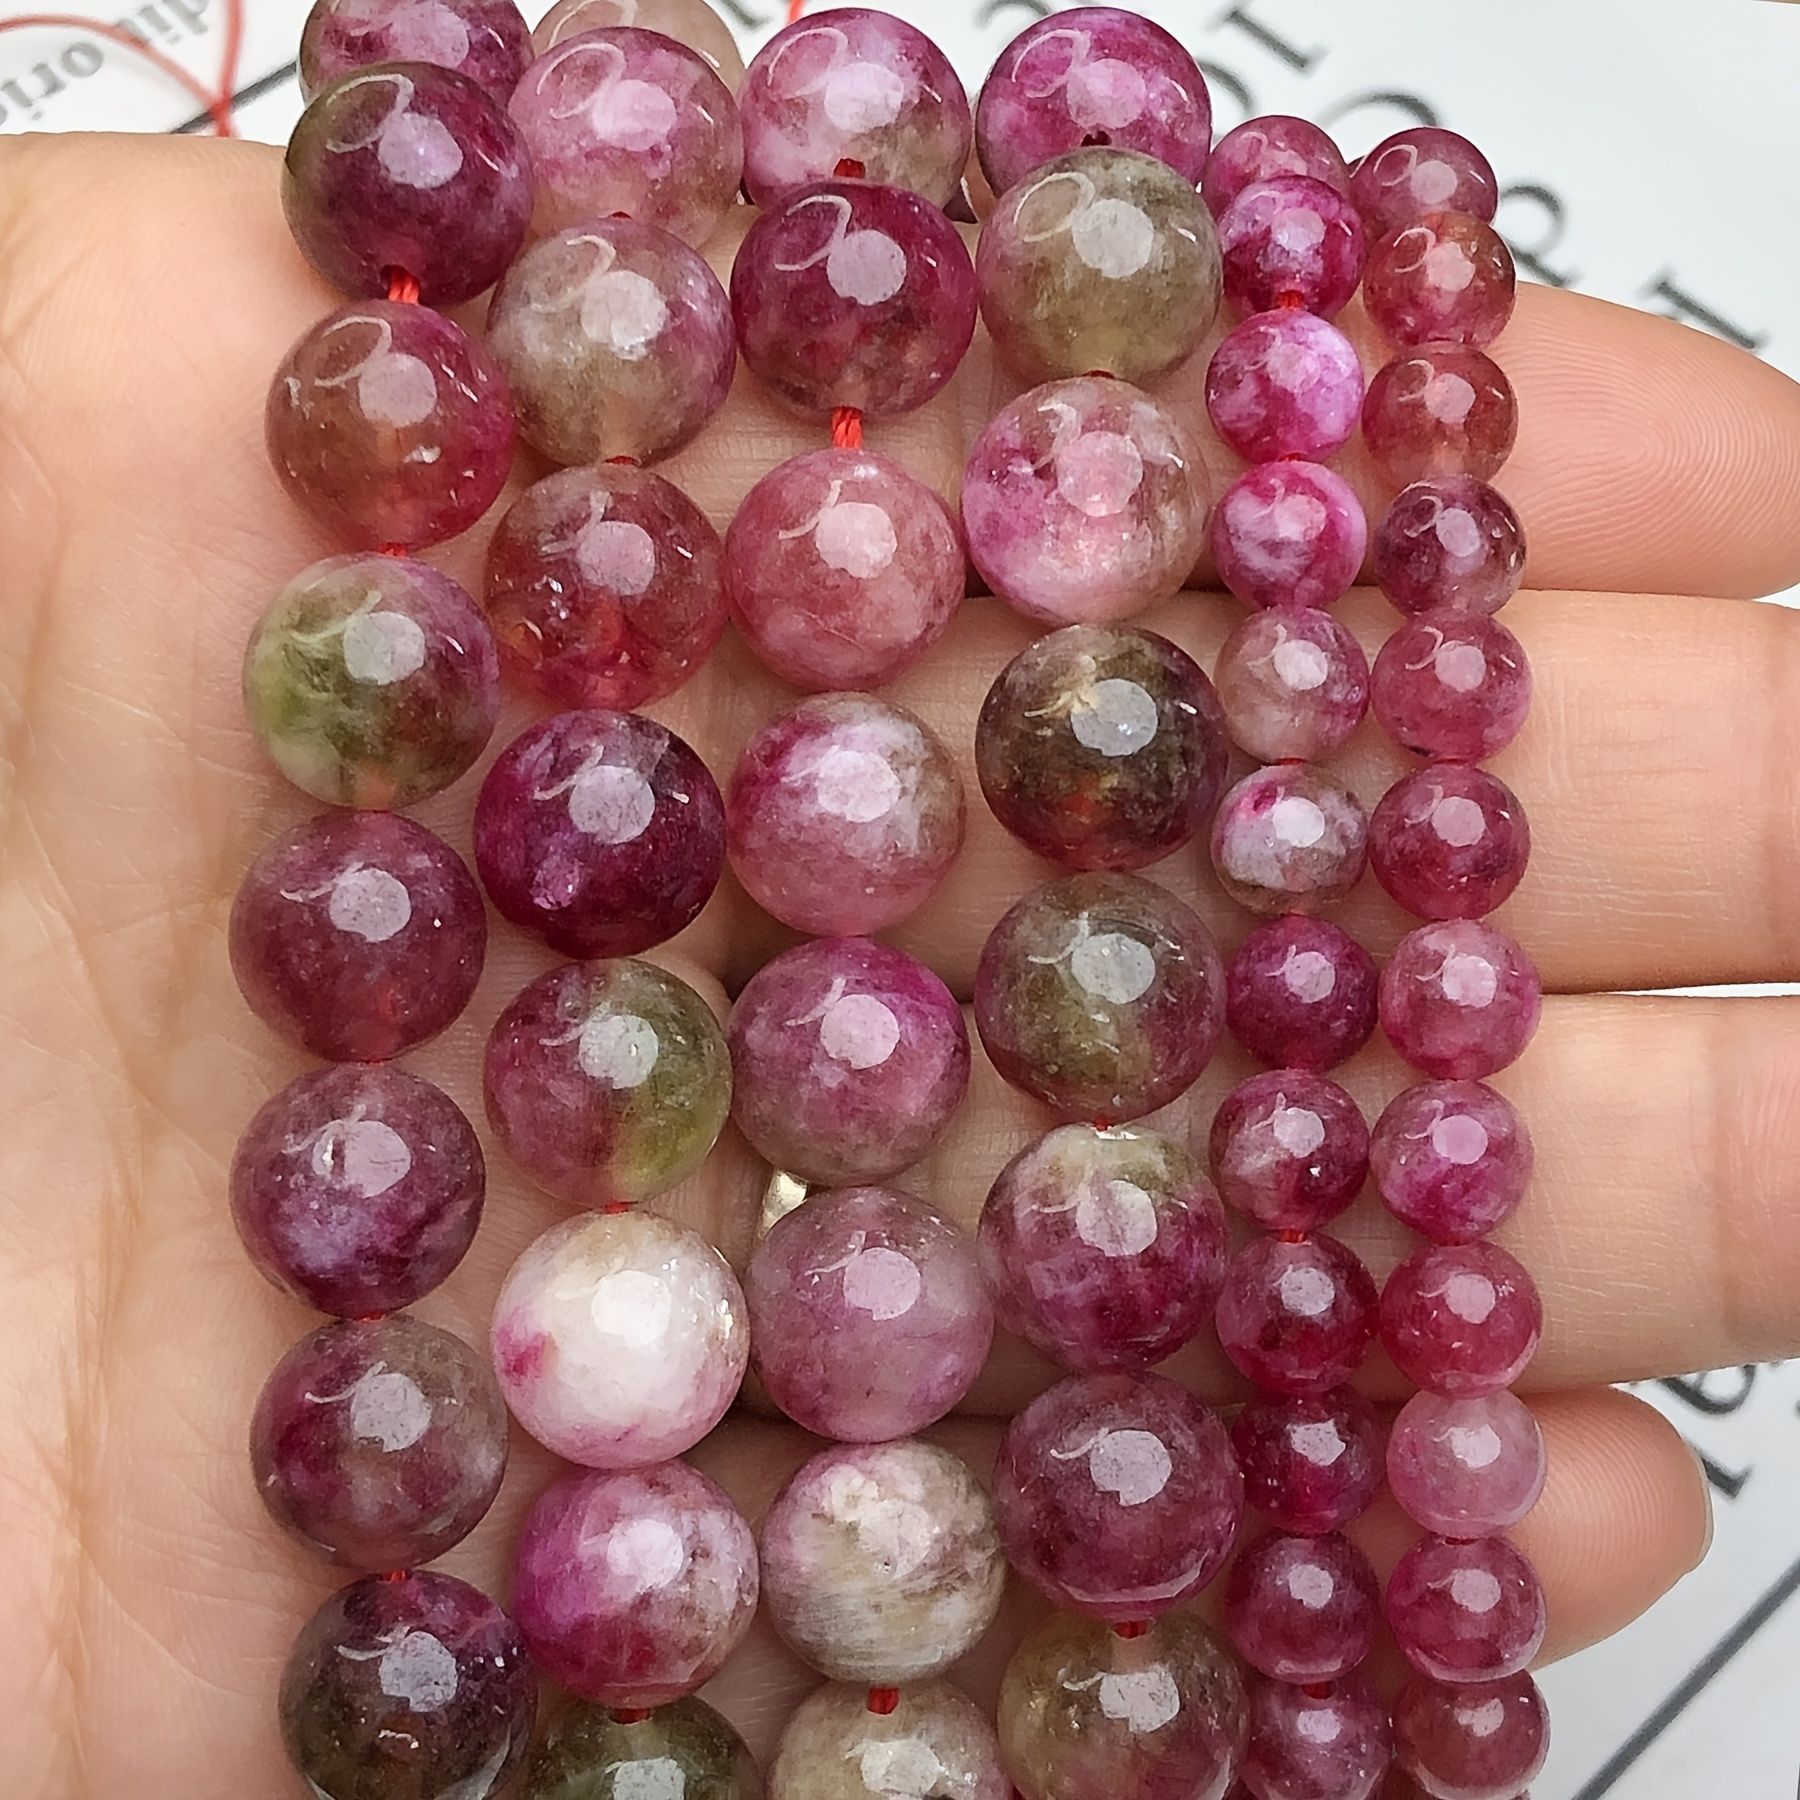 

Natural Stone Pink Tourmaline Crystal Beads Round Loose Spacer Beads For Jewelry Making Diy Earing Bracelet Accessories 8mm (0.315")